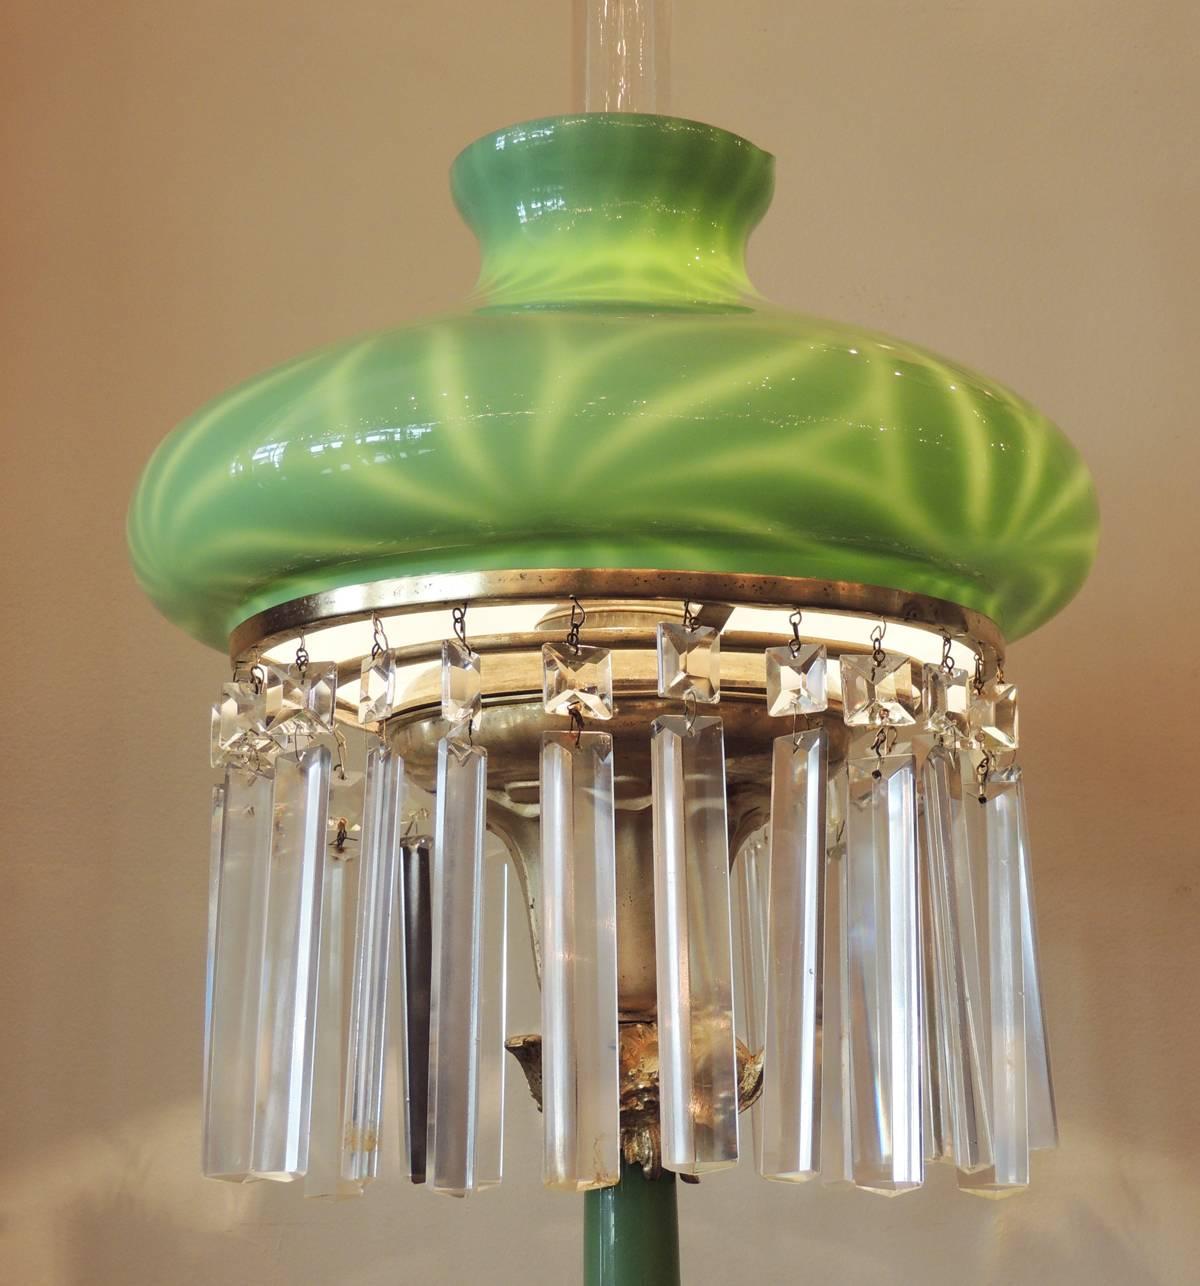 This magnificent lamp was created in the early half of the 20th century, circa 1900. This fixture features an art glass shade in the unusual tam-o-shanter form with pinwheel design. The shade has long hanging crystal prisms that surround tulip shape